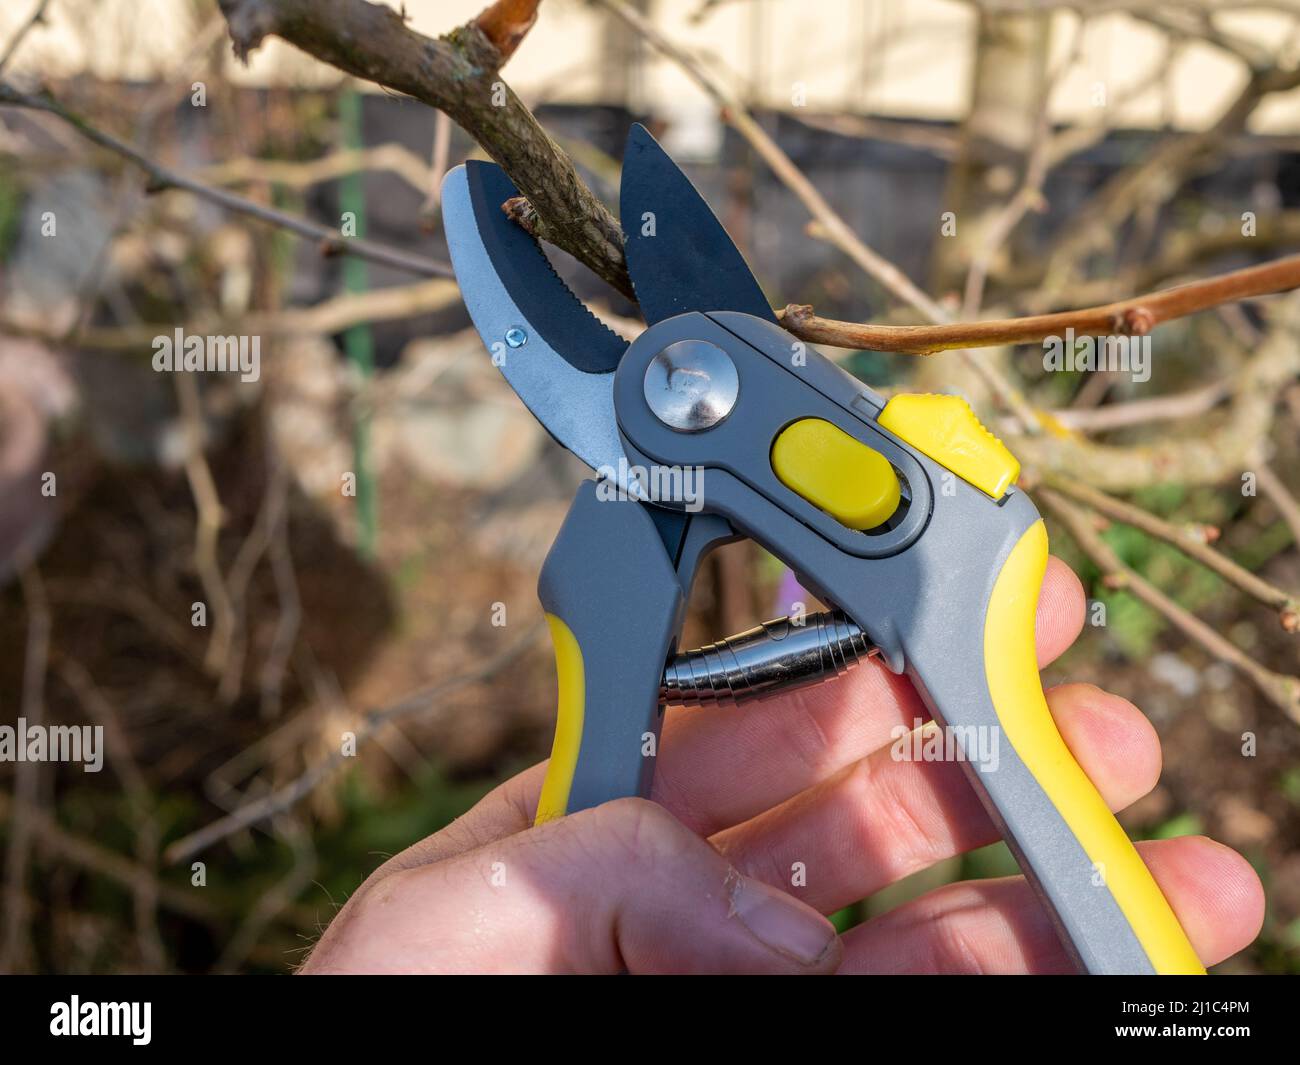 Tree pruning in the garden with scissors Stock Photo